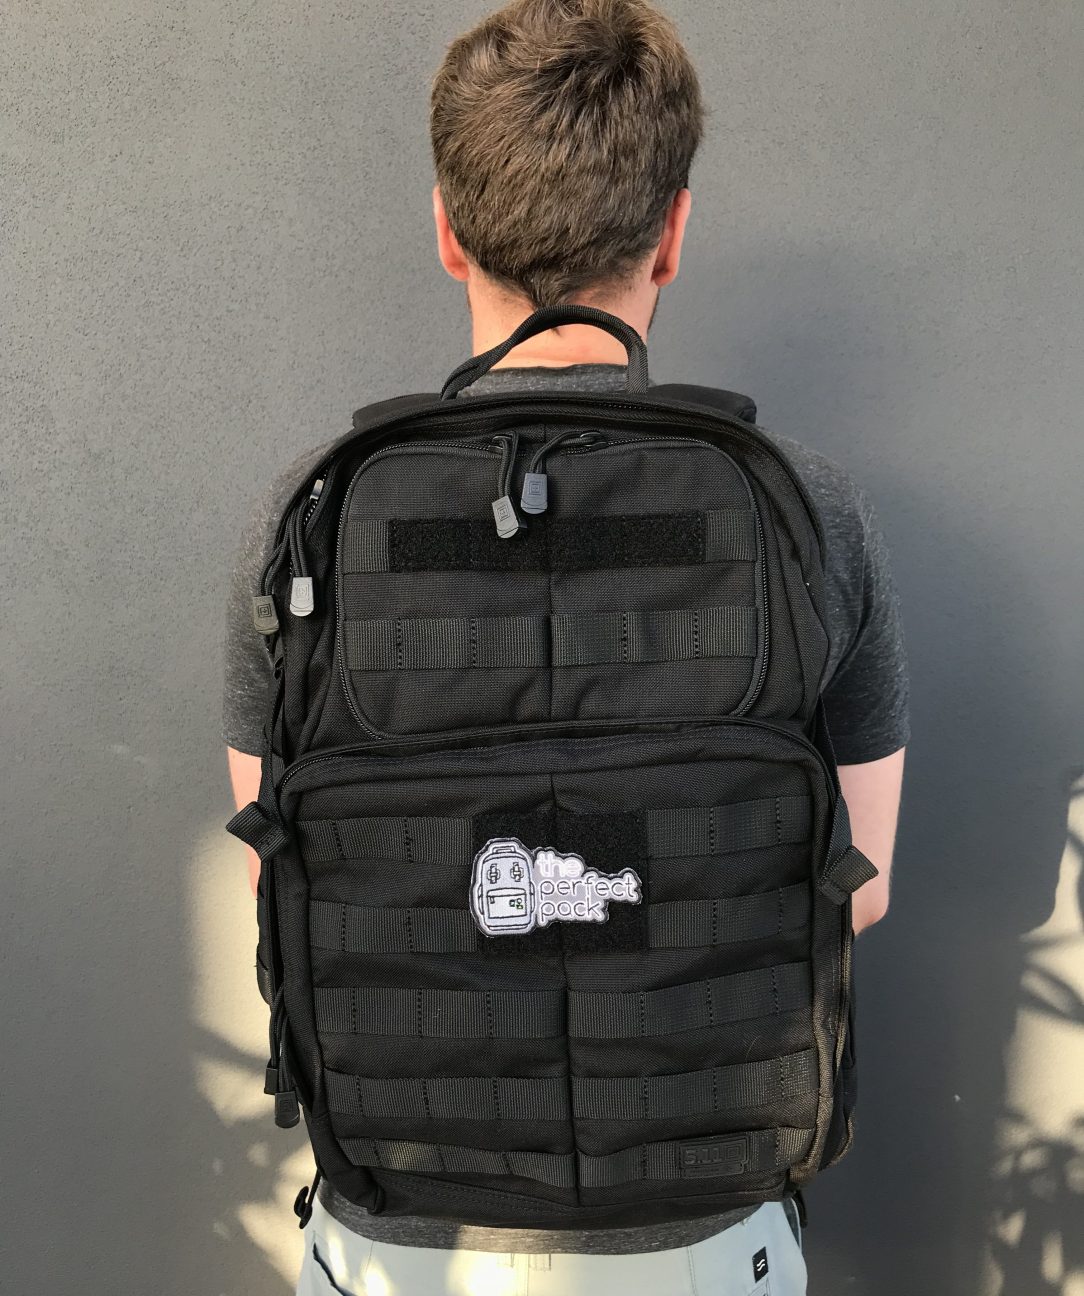 5.11 Rush 24 backpack review on body